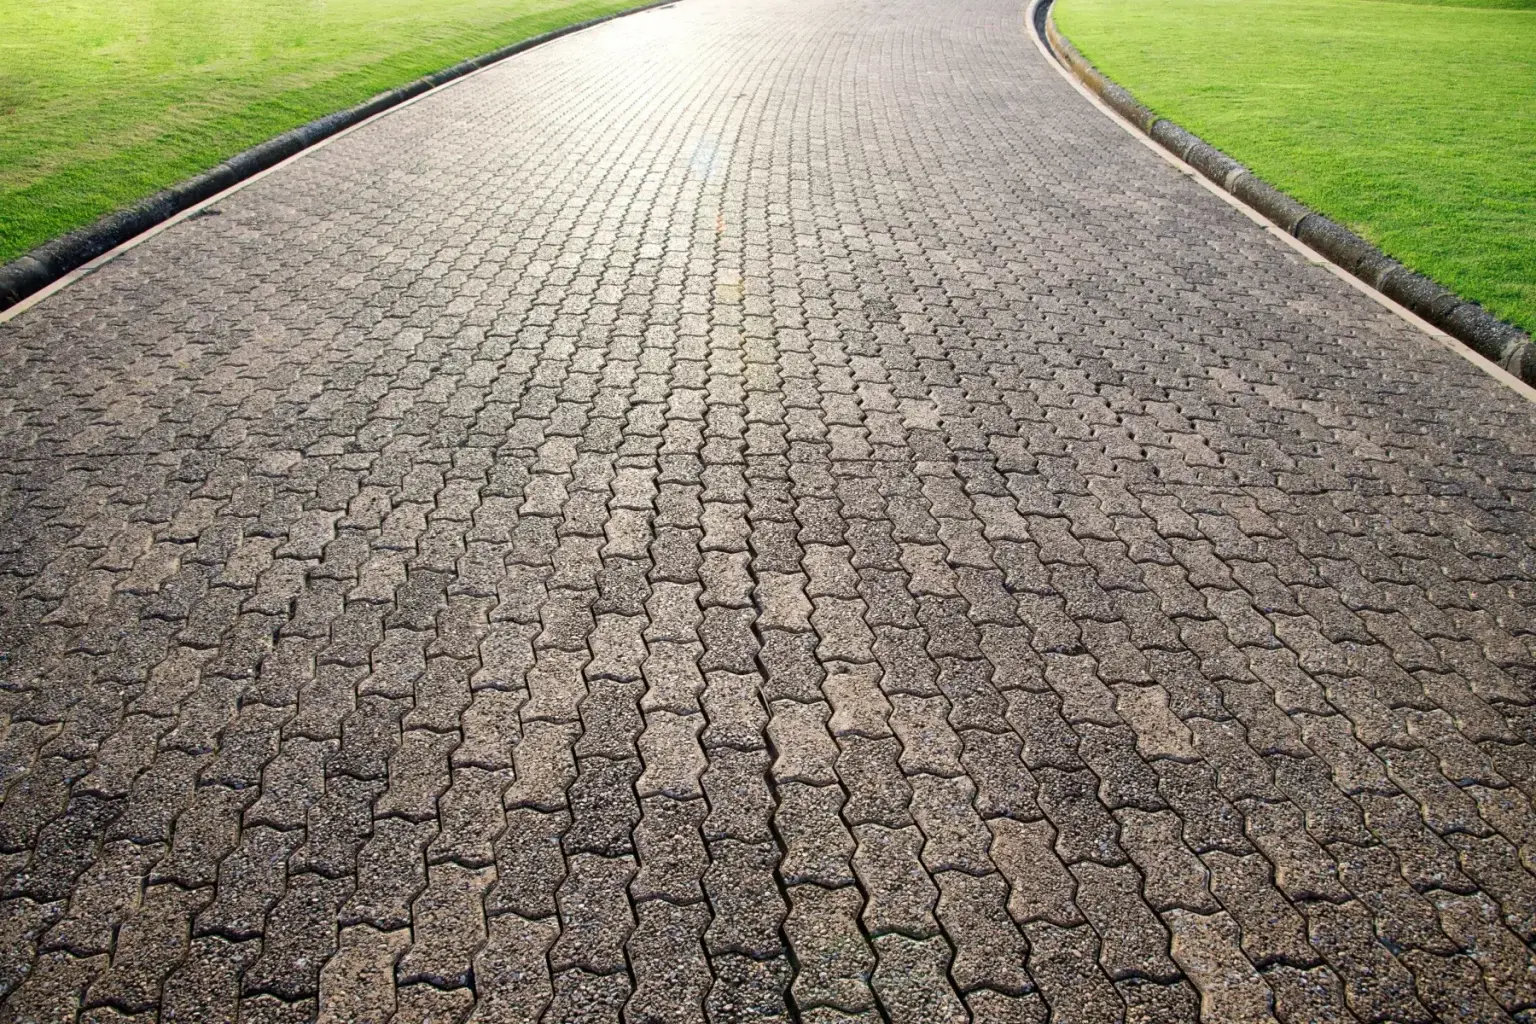 Types of Driveway Pavers - Visionary Landscaping Can Help You Choose